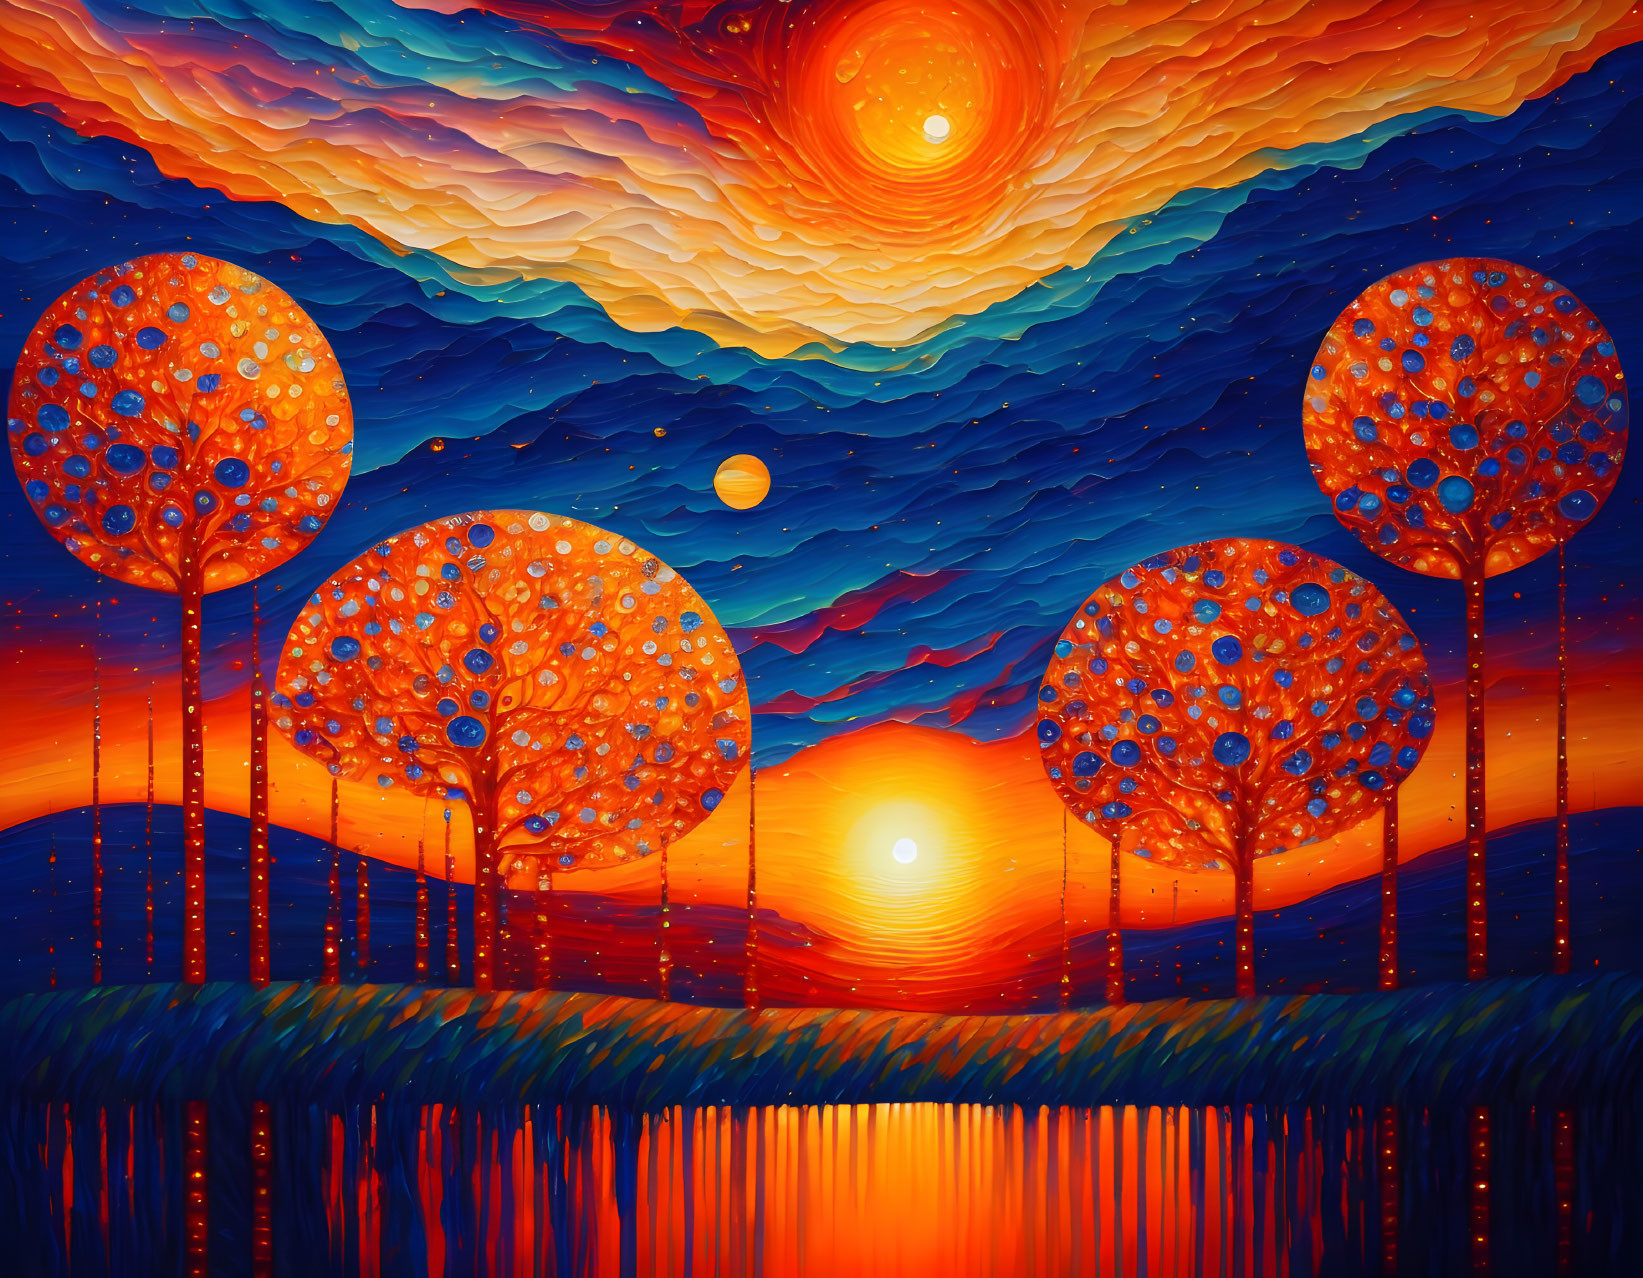 Colorful landscape painting with whimsical trees and fiery sky over water